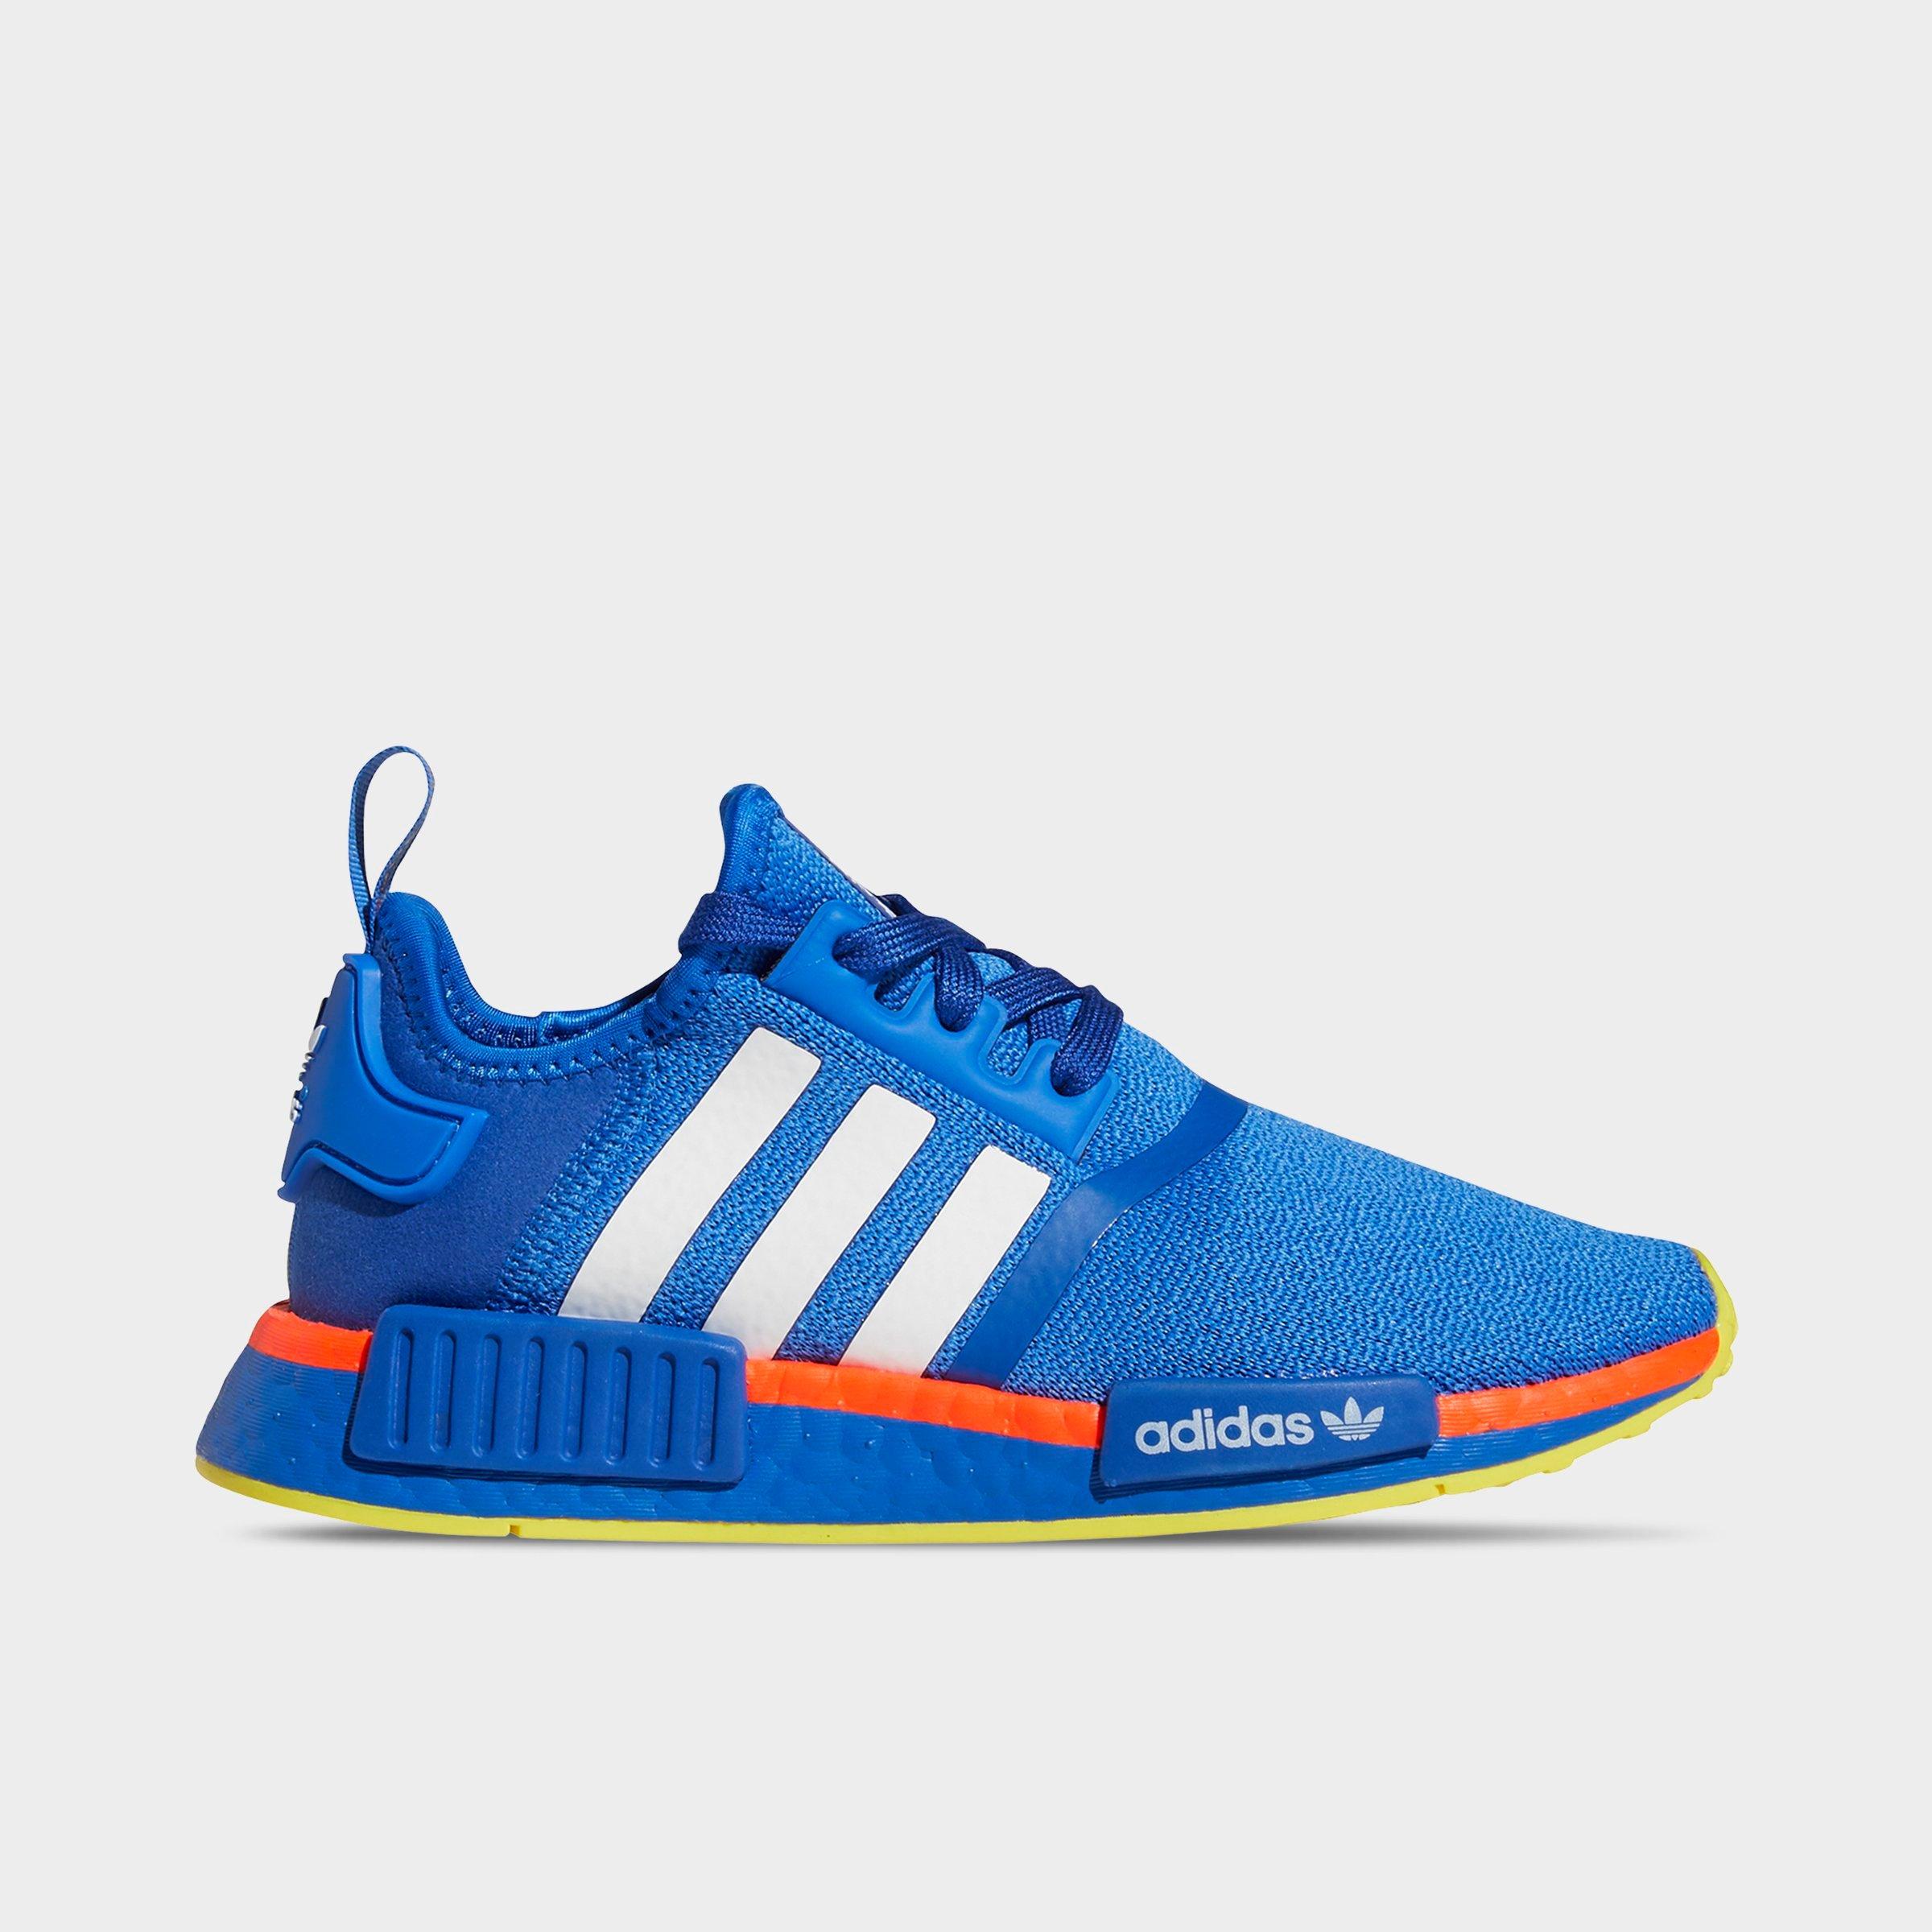 nmd size 3.5